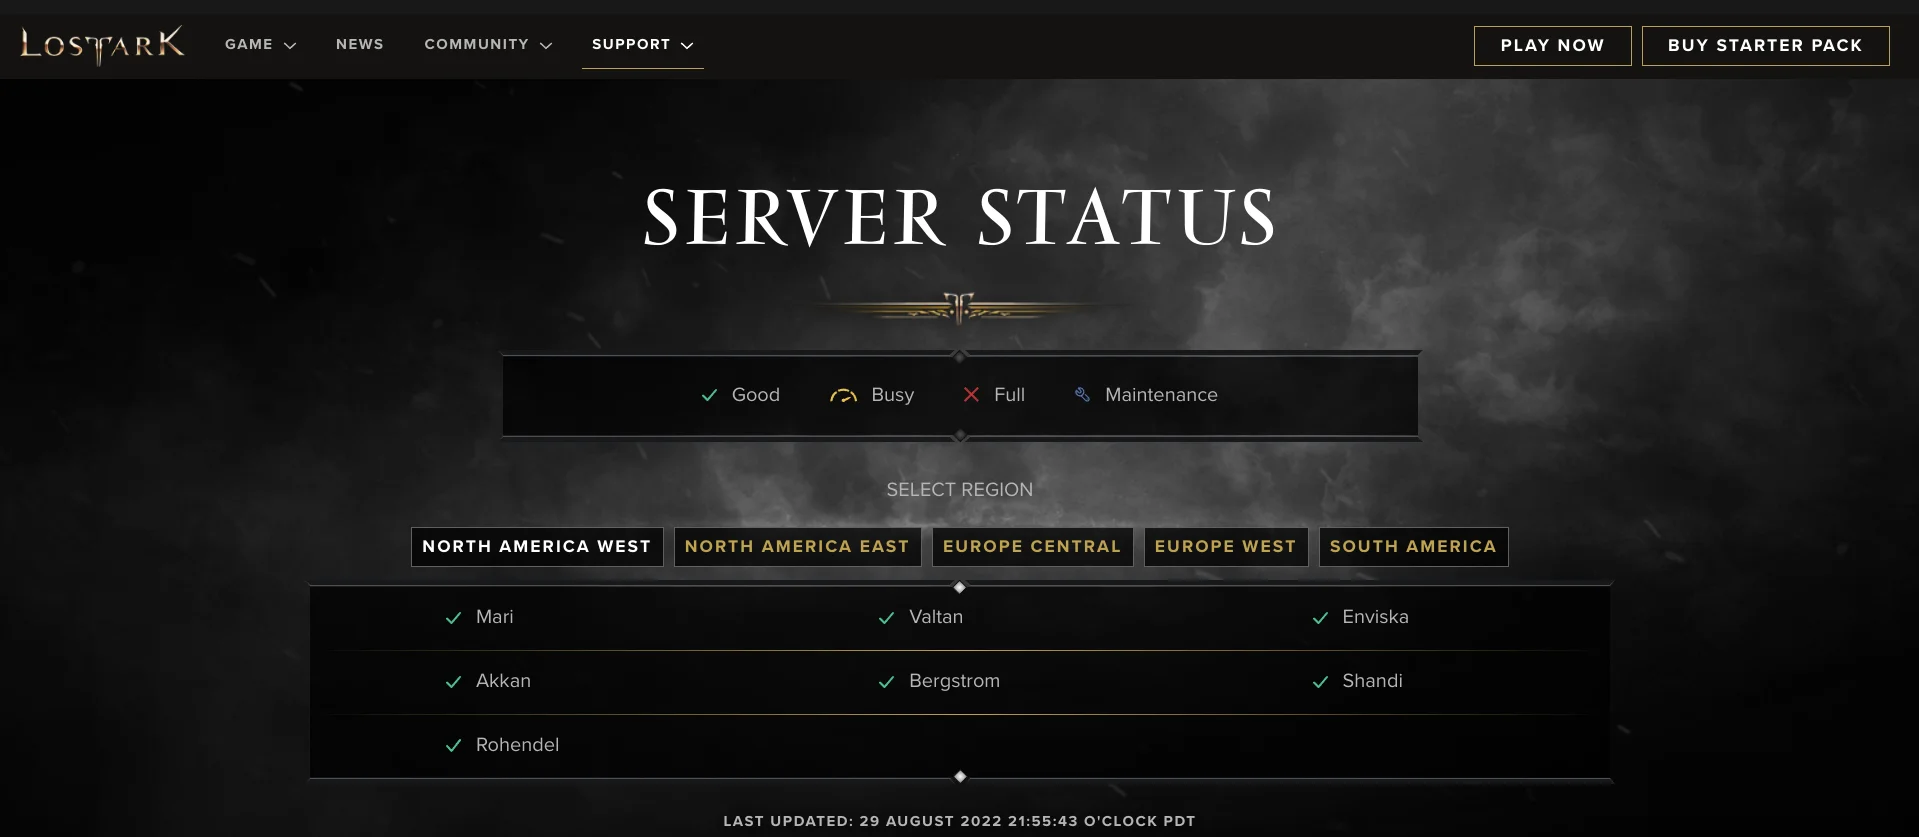 Are Lost Ark Servers Down? Check Lost Ark Server Status, Maintenance,  Problems and Outages - News